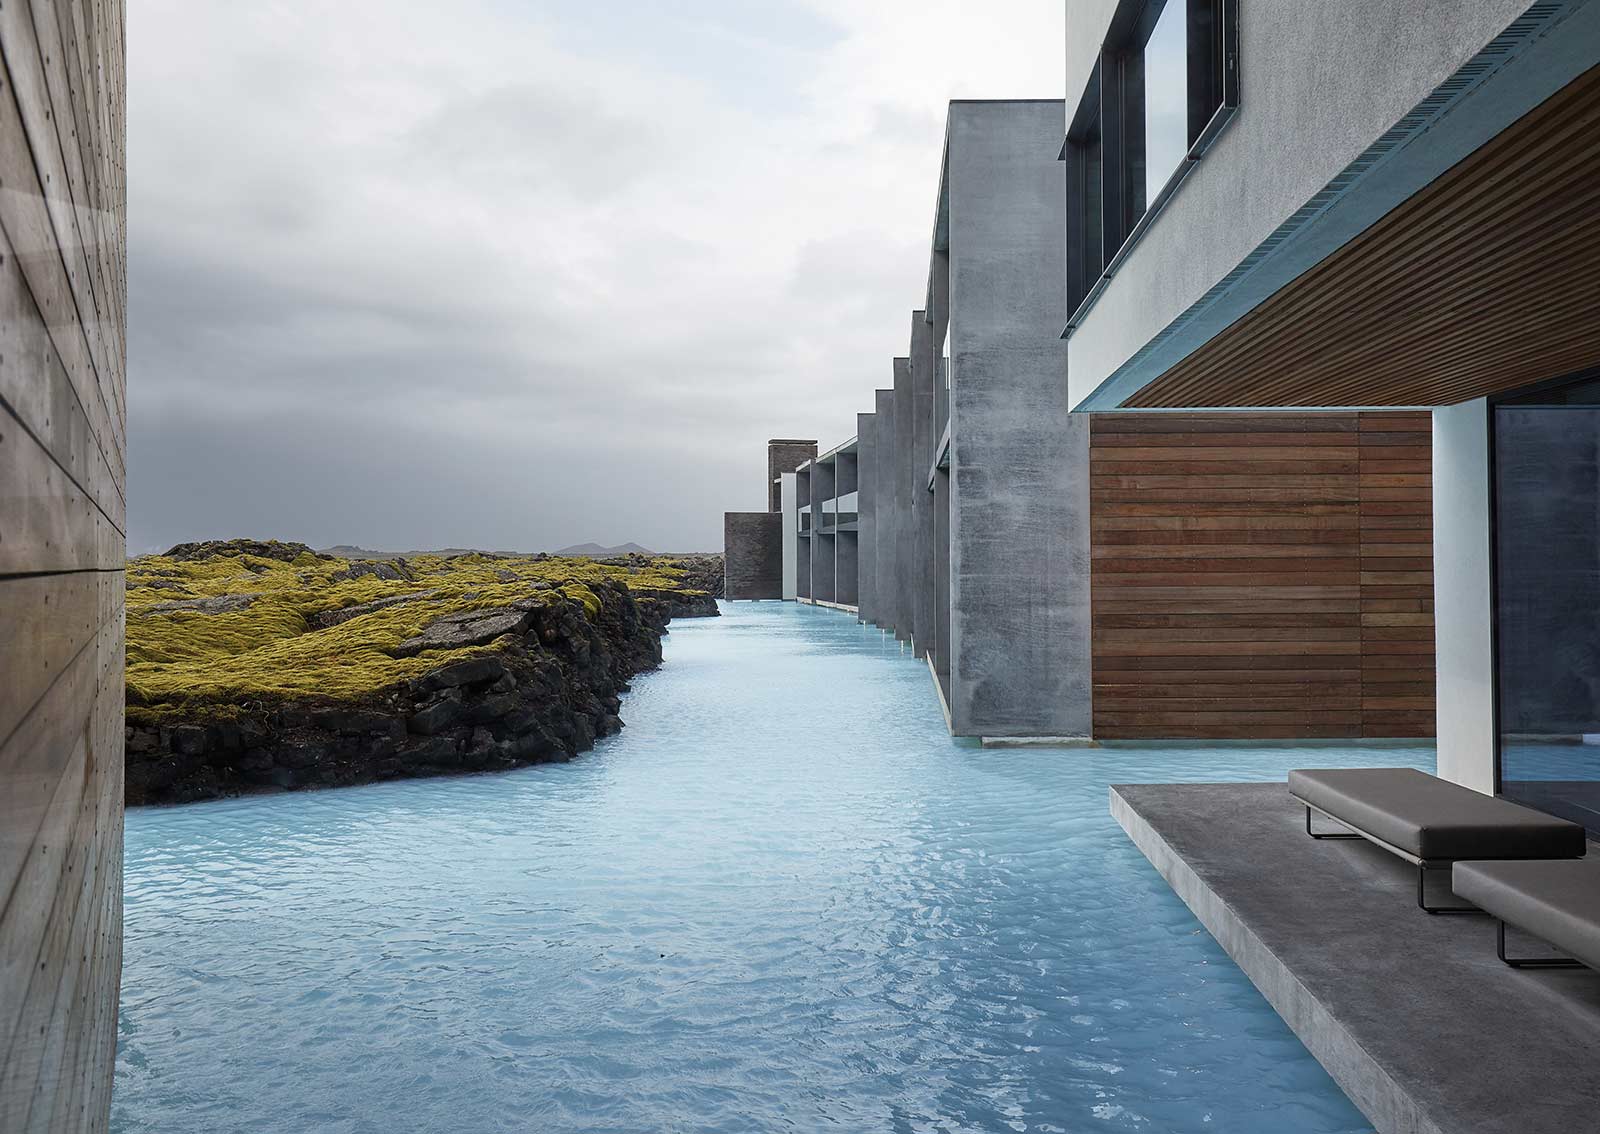 At Iceland’s Blue Lagoon, massage treatments are performed in the warm, therapeutic thermal waters. 